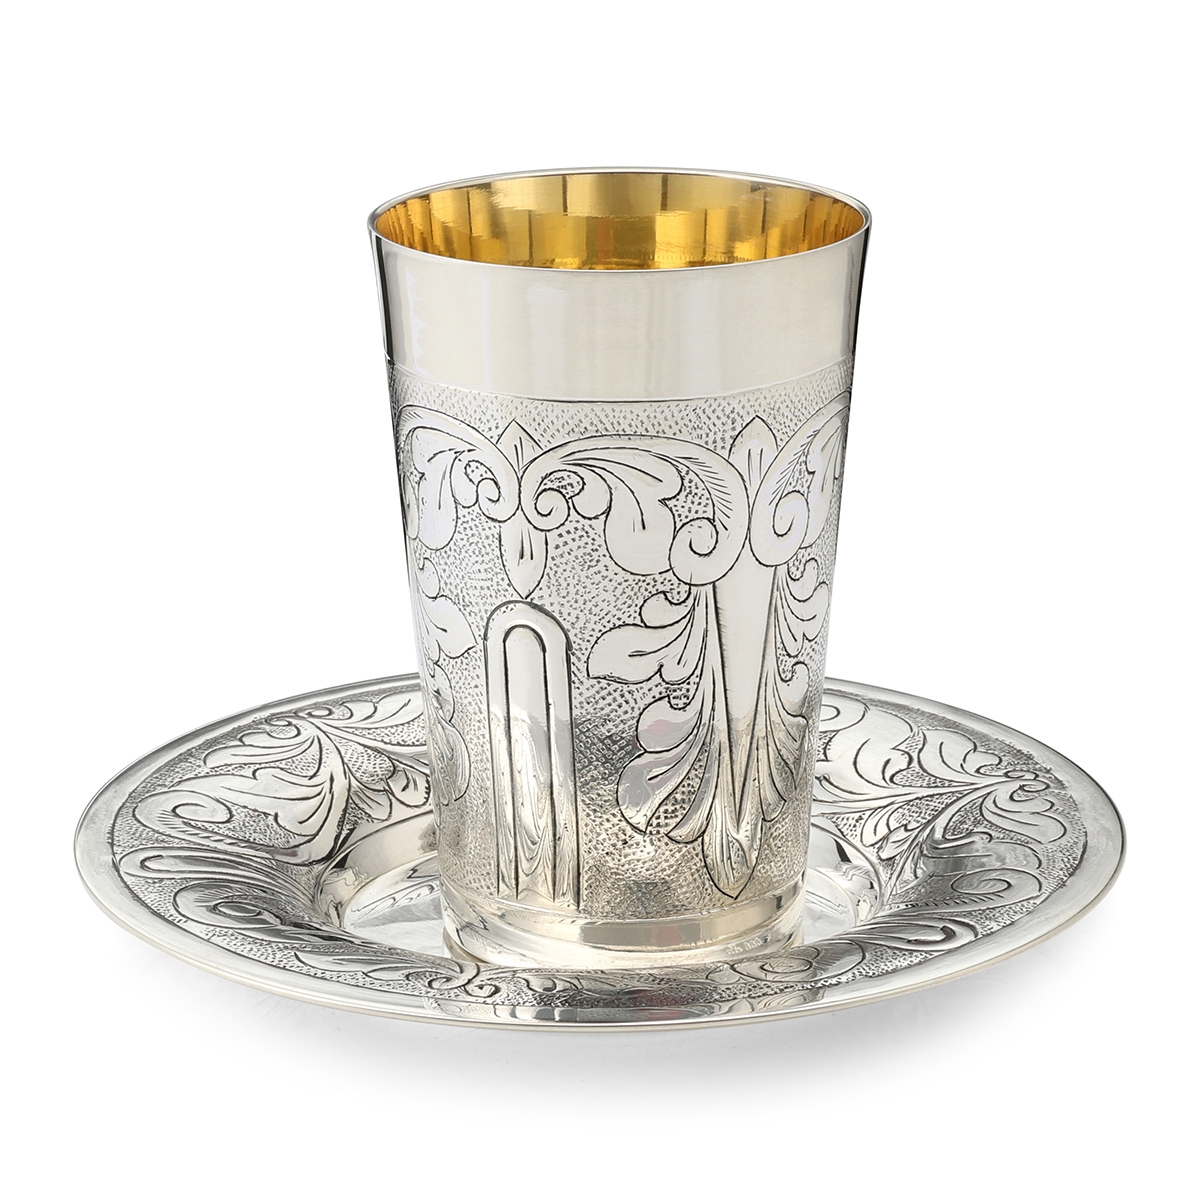 Sterling Silver Plated Kiddush Cup with Damask and Foliate Design - 1